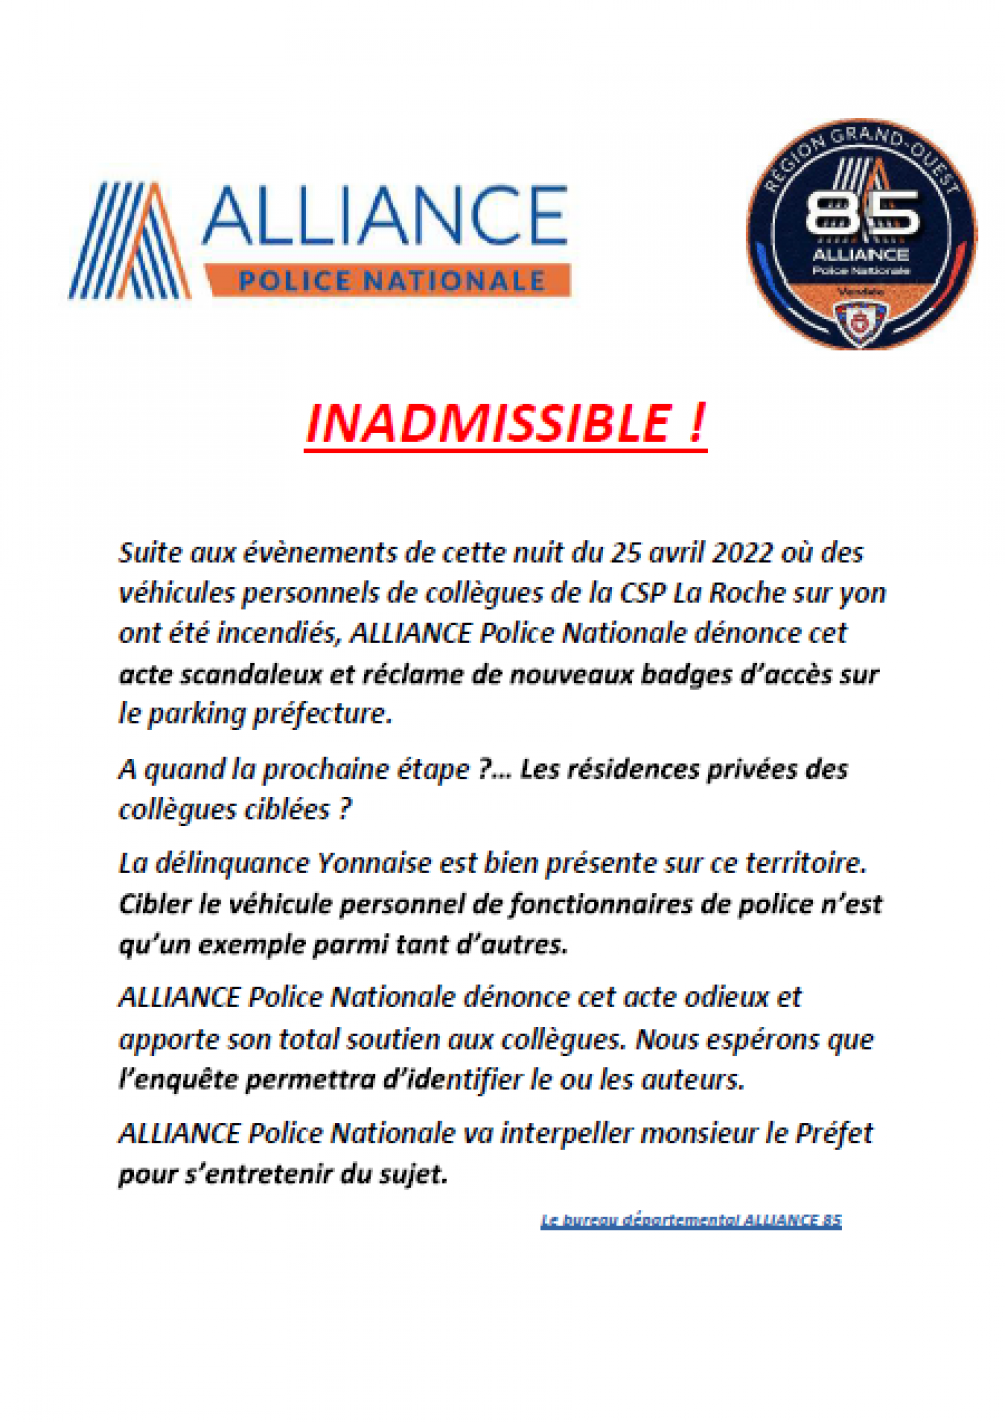 INADMISSIBLE !